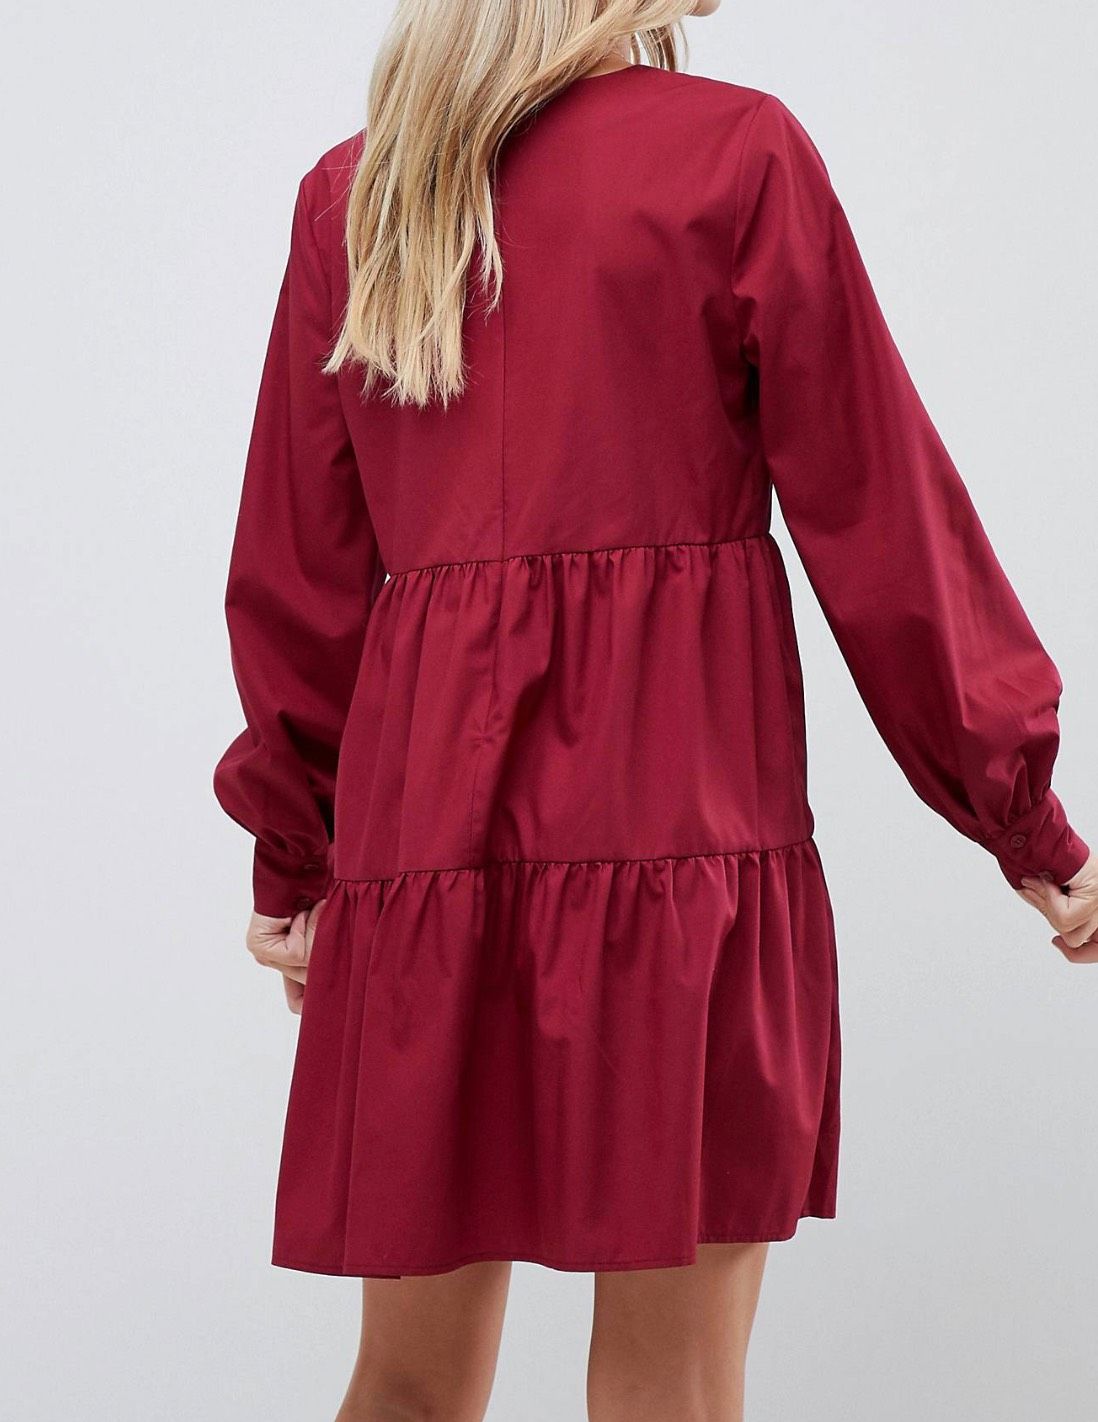 ASOS Size 6 Long Sleeve Red Cocktail Dress on Queenly